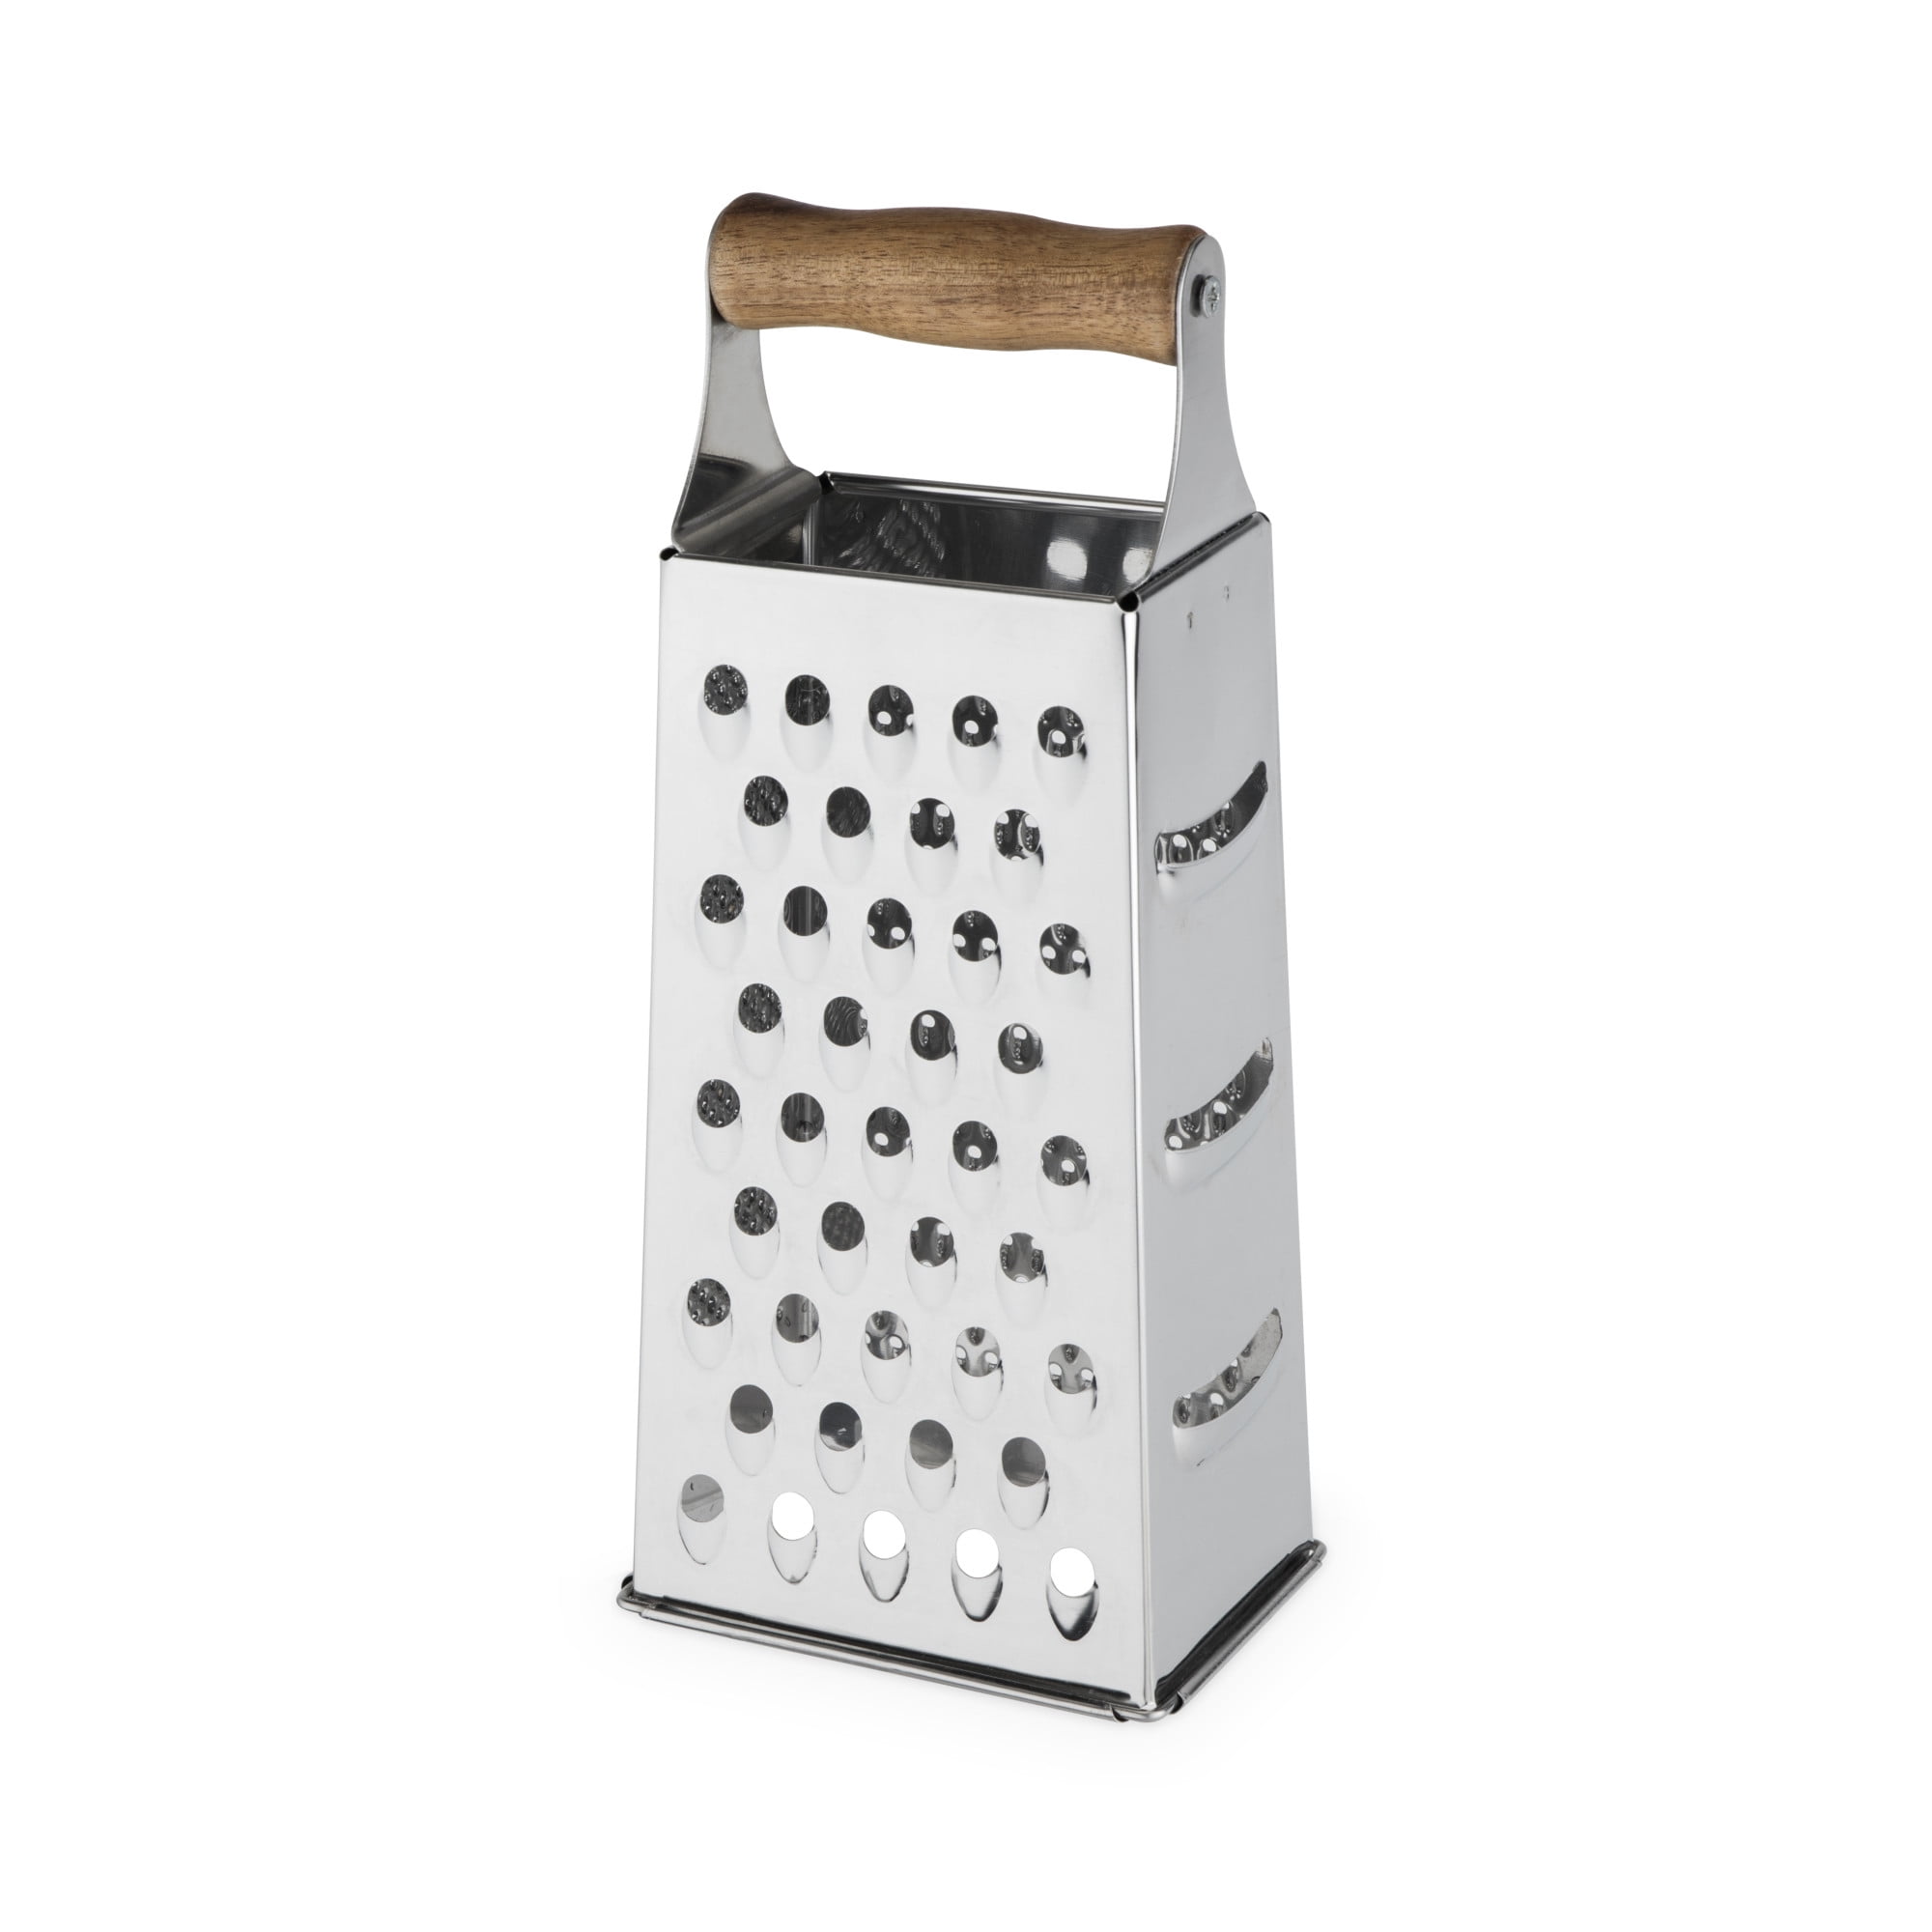 Industrial cheese grater with large transparent tray, 3000W/400V